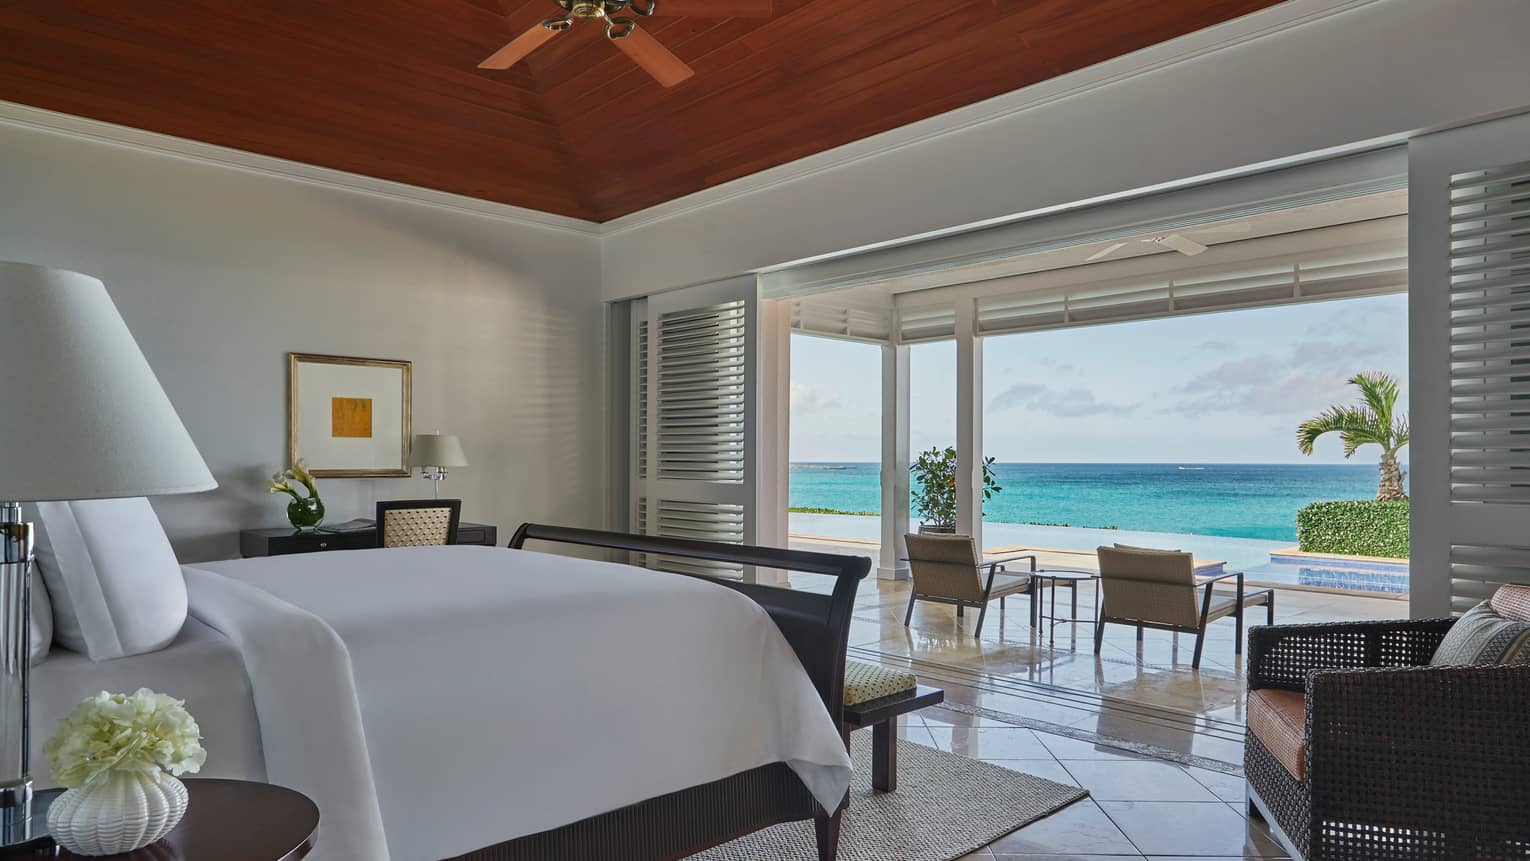 Hotel bed across from open wall to patio overlooking white sand beach, oceanfront